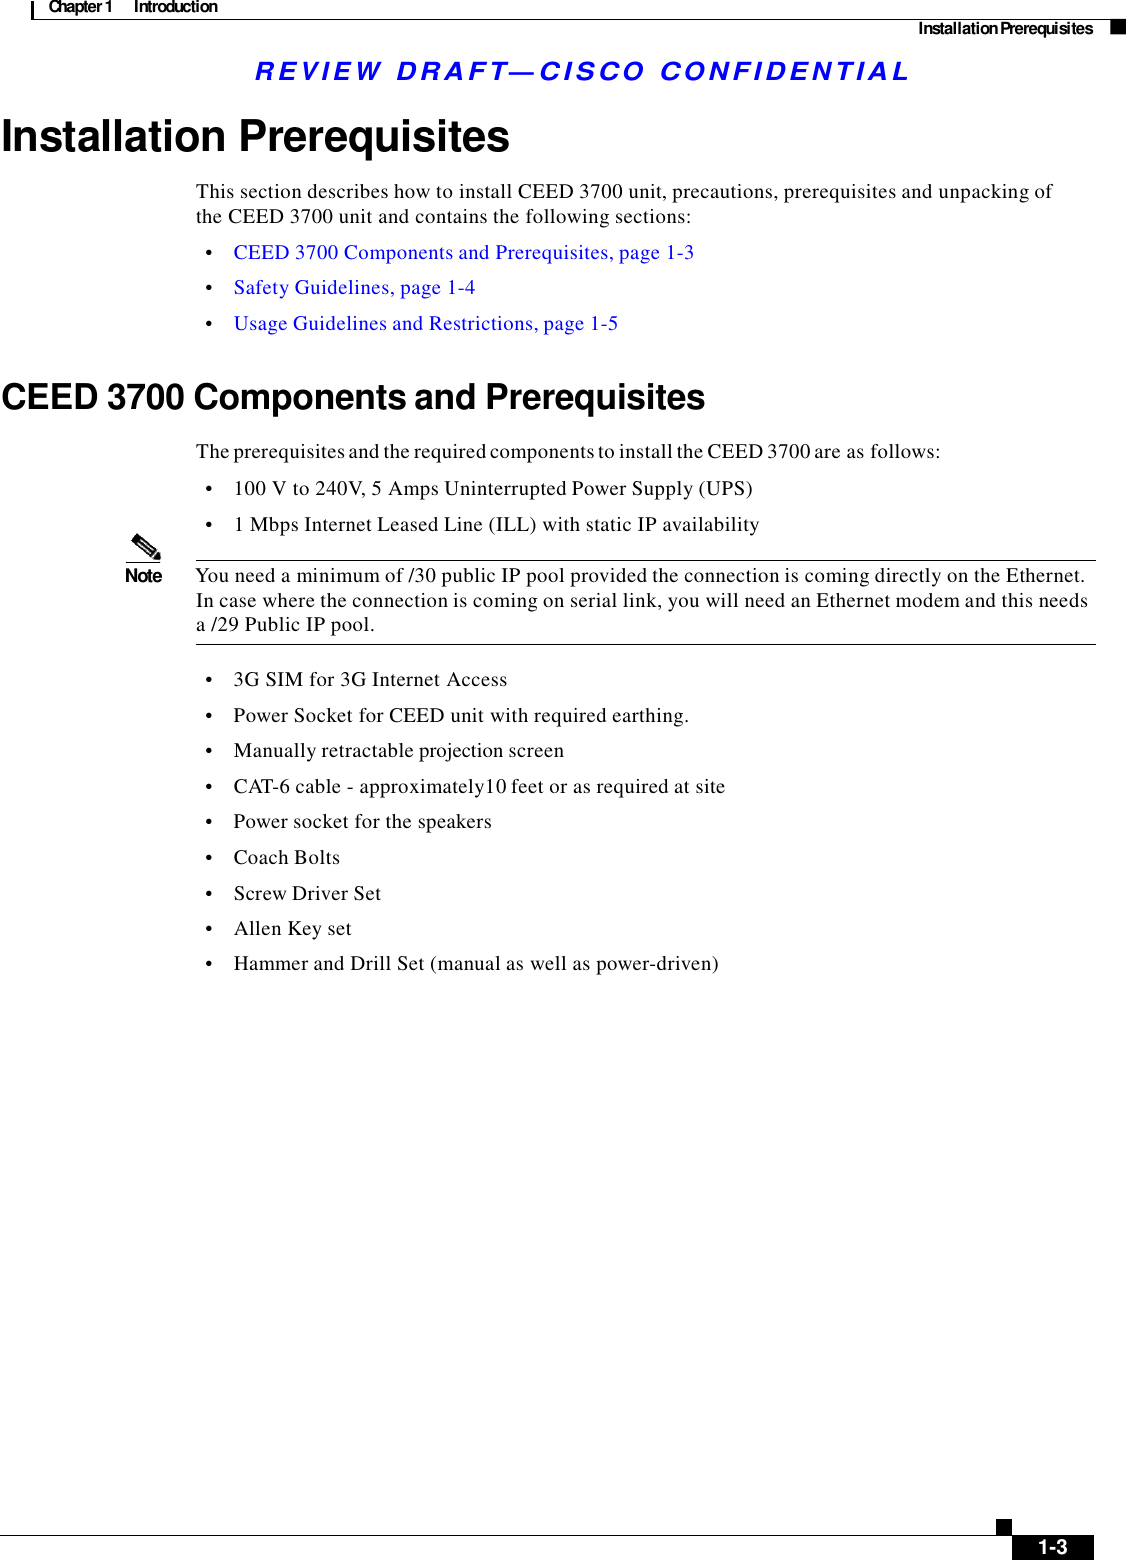 Chapter 1  Introduction Installation Prerequisites R E V I E W  DR AFT — CISC O  C O NF IDE N TIAL    Installation Prerequisites  This section describes how to install CEED 3700 unit, precautions, prerequisites and unpacking of the CEED 3700 unit and contains the following sections:  •    CEED 3700 Components and Prerequisites, page 1-3  •    Safety Guidelines, page 1-4  •    Usage Guidelines and Restrictions, page 1-5   CEED 3700 Components and Prerequisites  The prerequisites and the required components to install the CEED 3700 are as follows:  •    100 V to 240V, 5 Amps Uninterrupted Power Supply (UPS)  •    1 Mbps Internet Leased Line (ILL) with static IP availability  Note  You need a minimum of /30 public IP pool provided the connection is coming directly on the Ethernet. In case where the connection is coming on serial link, you will need an Ethernet modem and this needs a /29 Public IP pool.  •    3G SIM for 3G Internet Access •    Power Socket for CEED unit with required earthing.  •    Manually retractable projection screen  •    CAT-6 cable - approximately10 feet or as required at site  •    Power socket for the speakers •    Coach Bolts  •    Screw Driver Set  •    Allen Key set  •    Hammer and Drill Set (manual as well as power-driven)                            1-3 